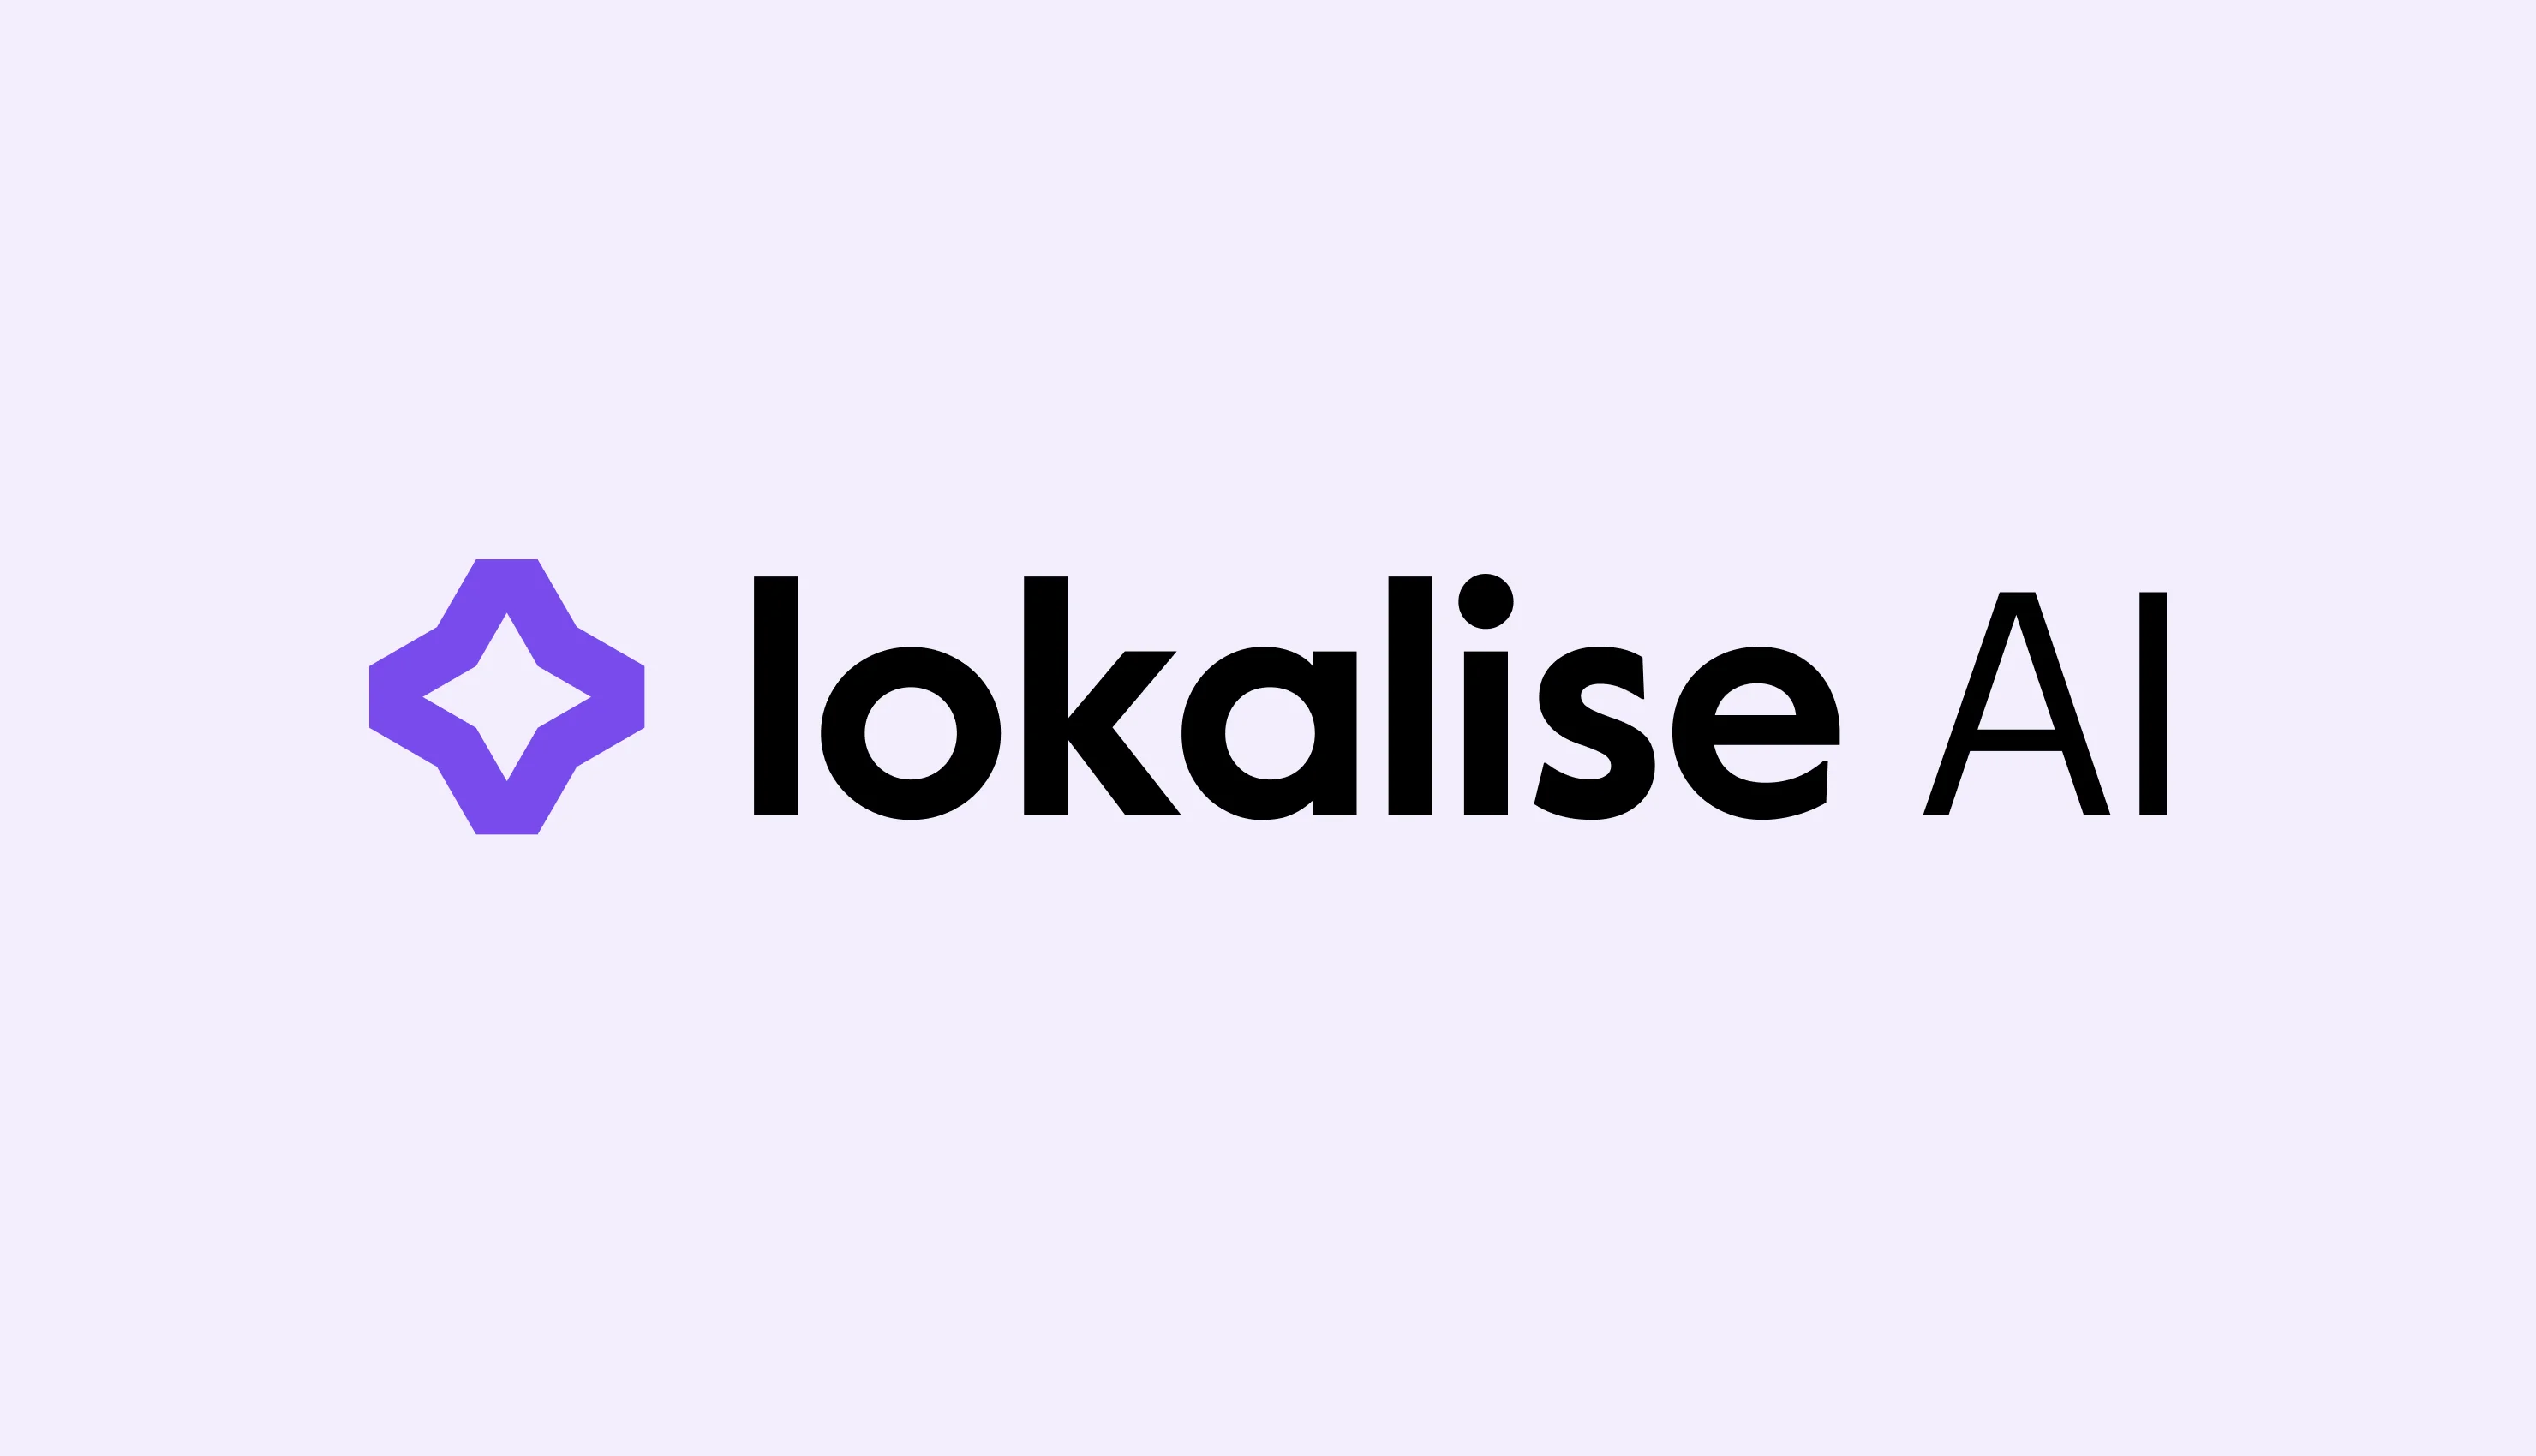 Introducing Lokalise AI: Your personal localization assistant